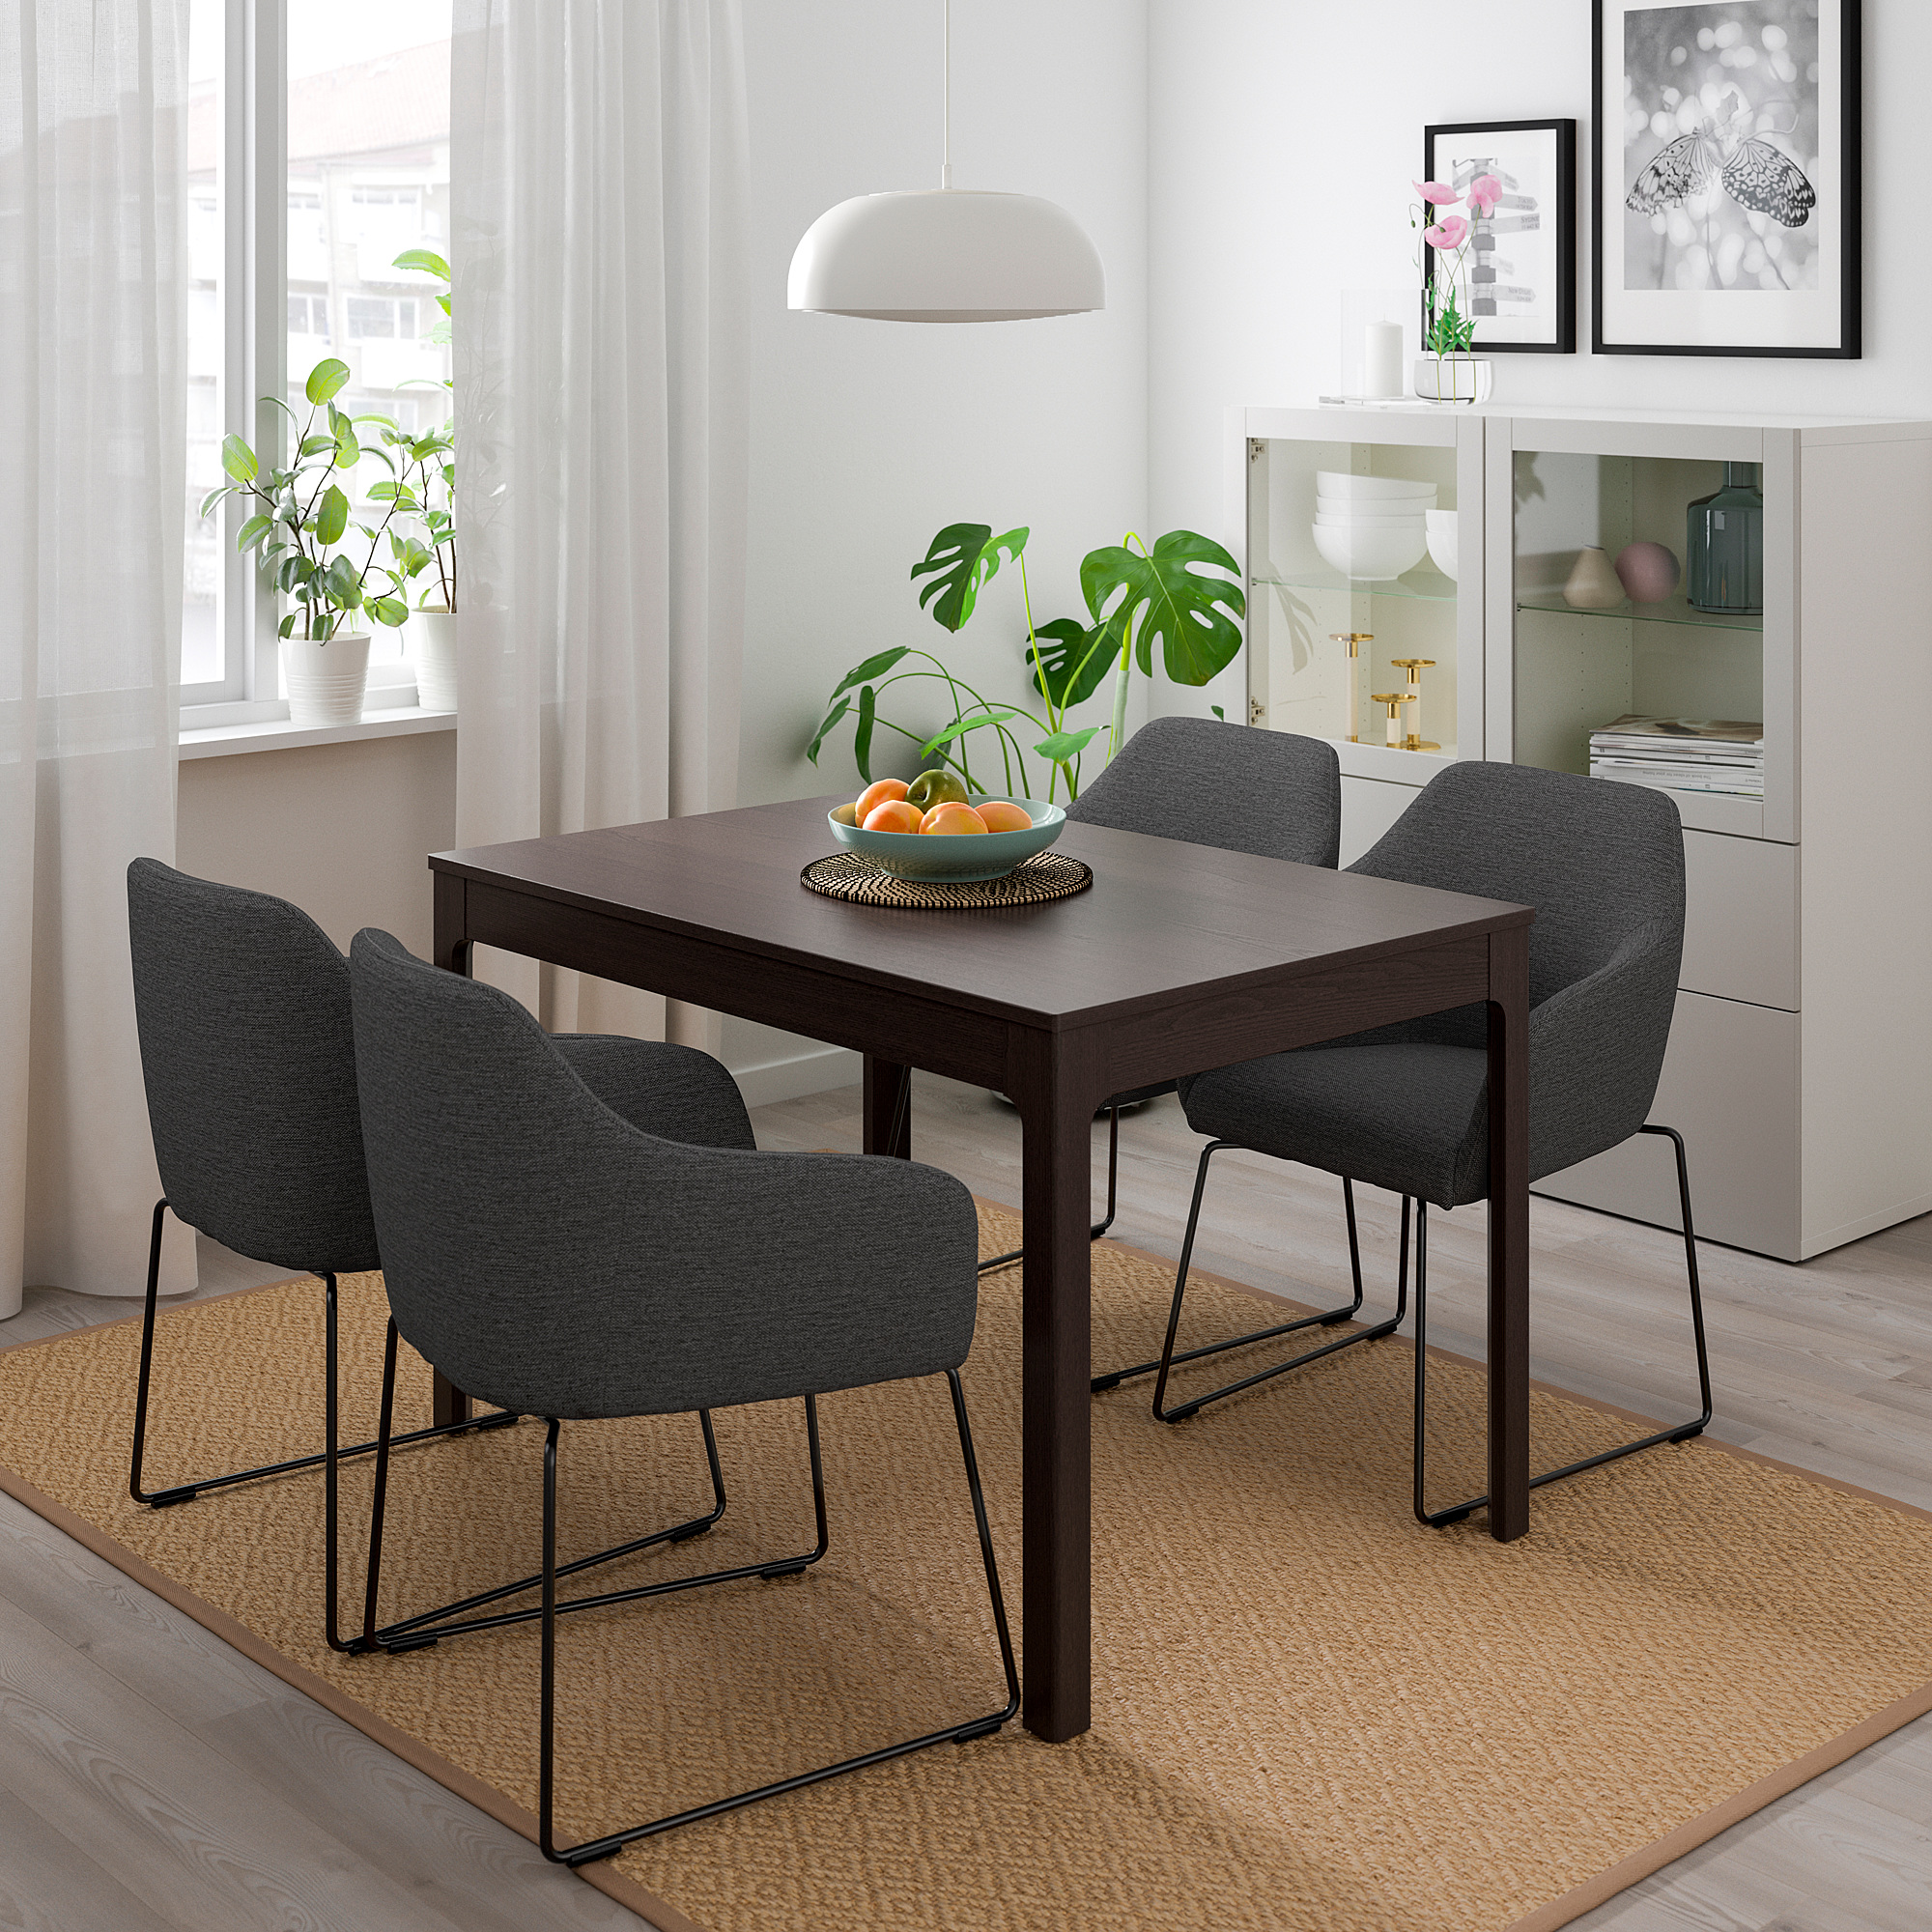 Ekedalen Tossberg Table And 4 Chairs